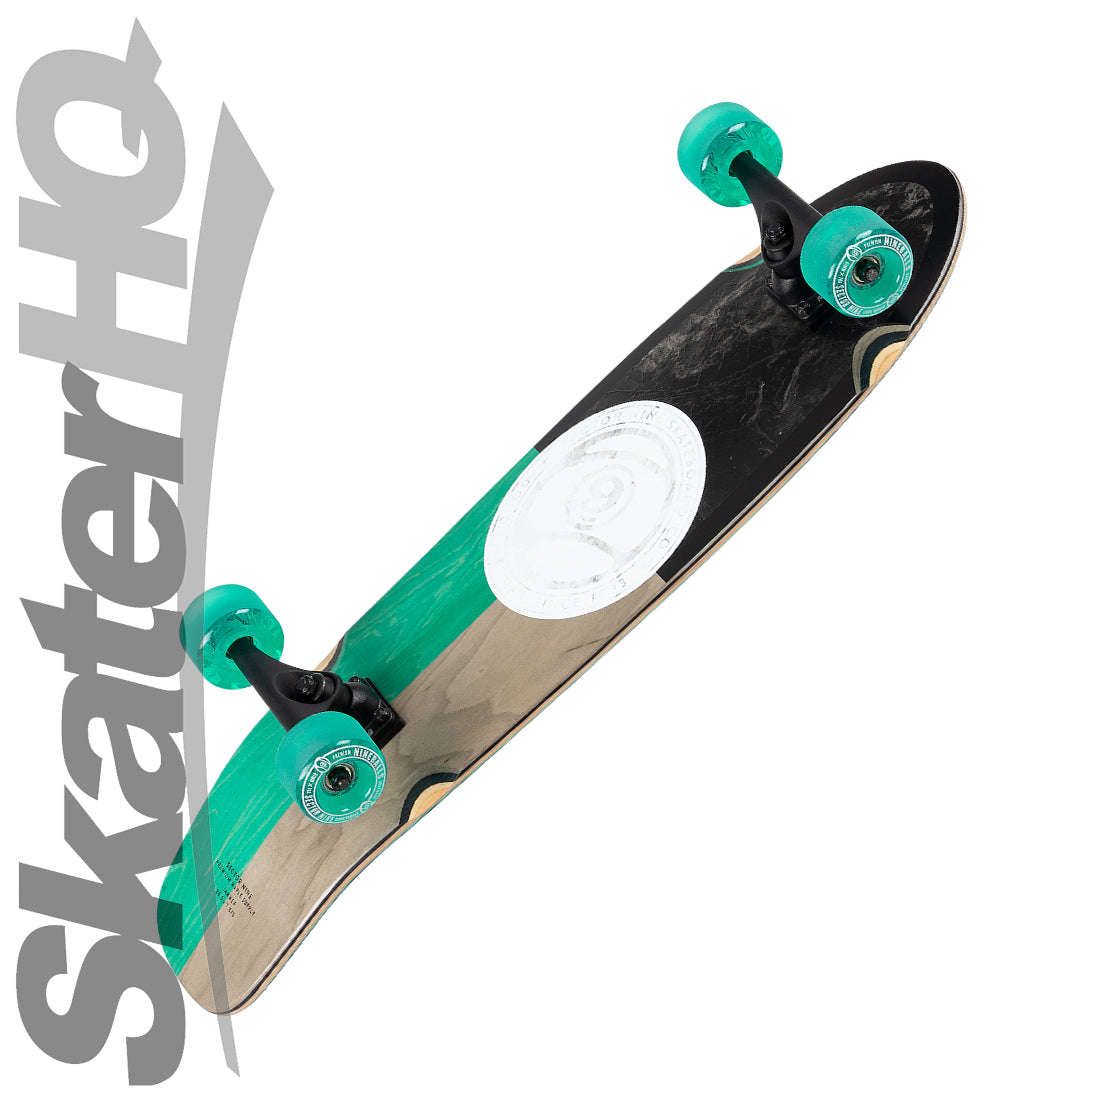 Sector 9 Jammer Divide 7.875x28.5 Complete - Black/Green Skateboard Compl Cruisers